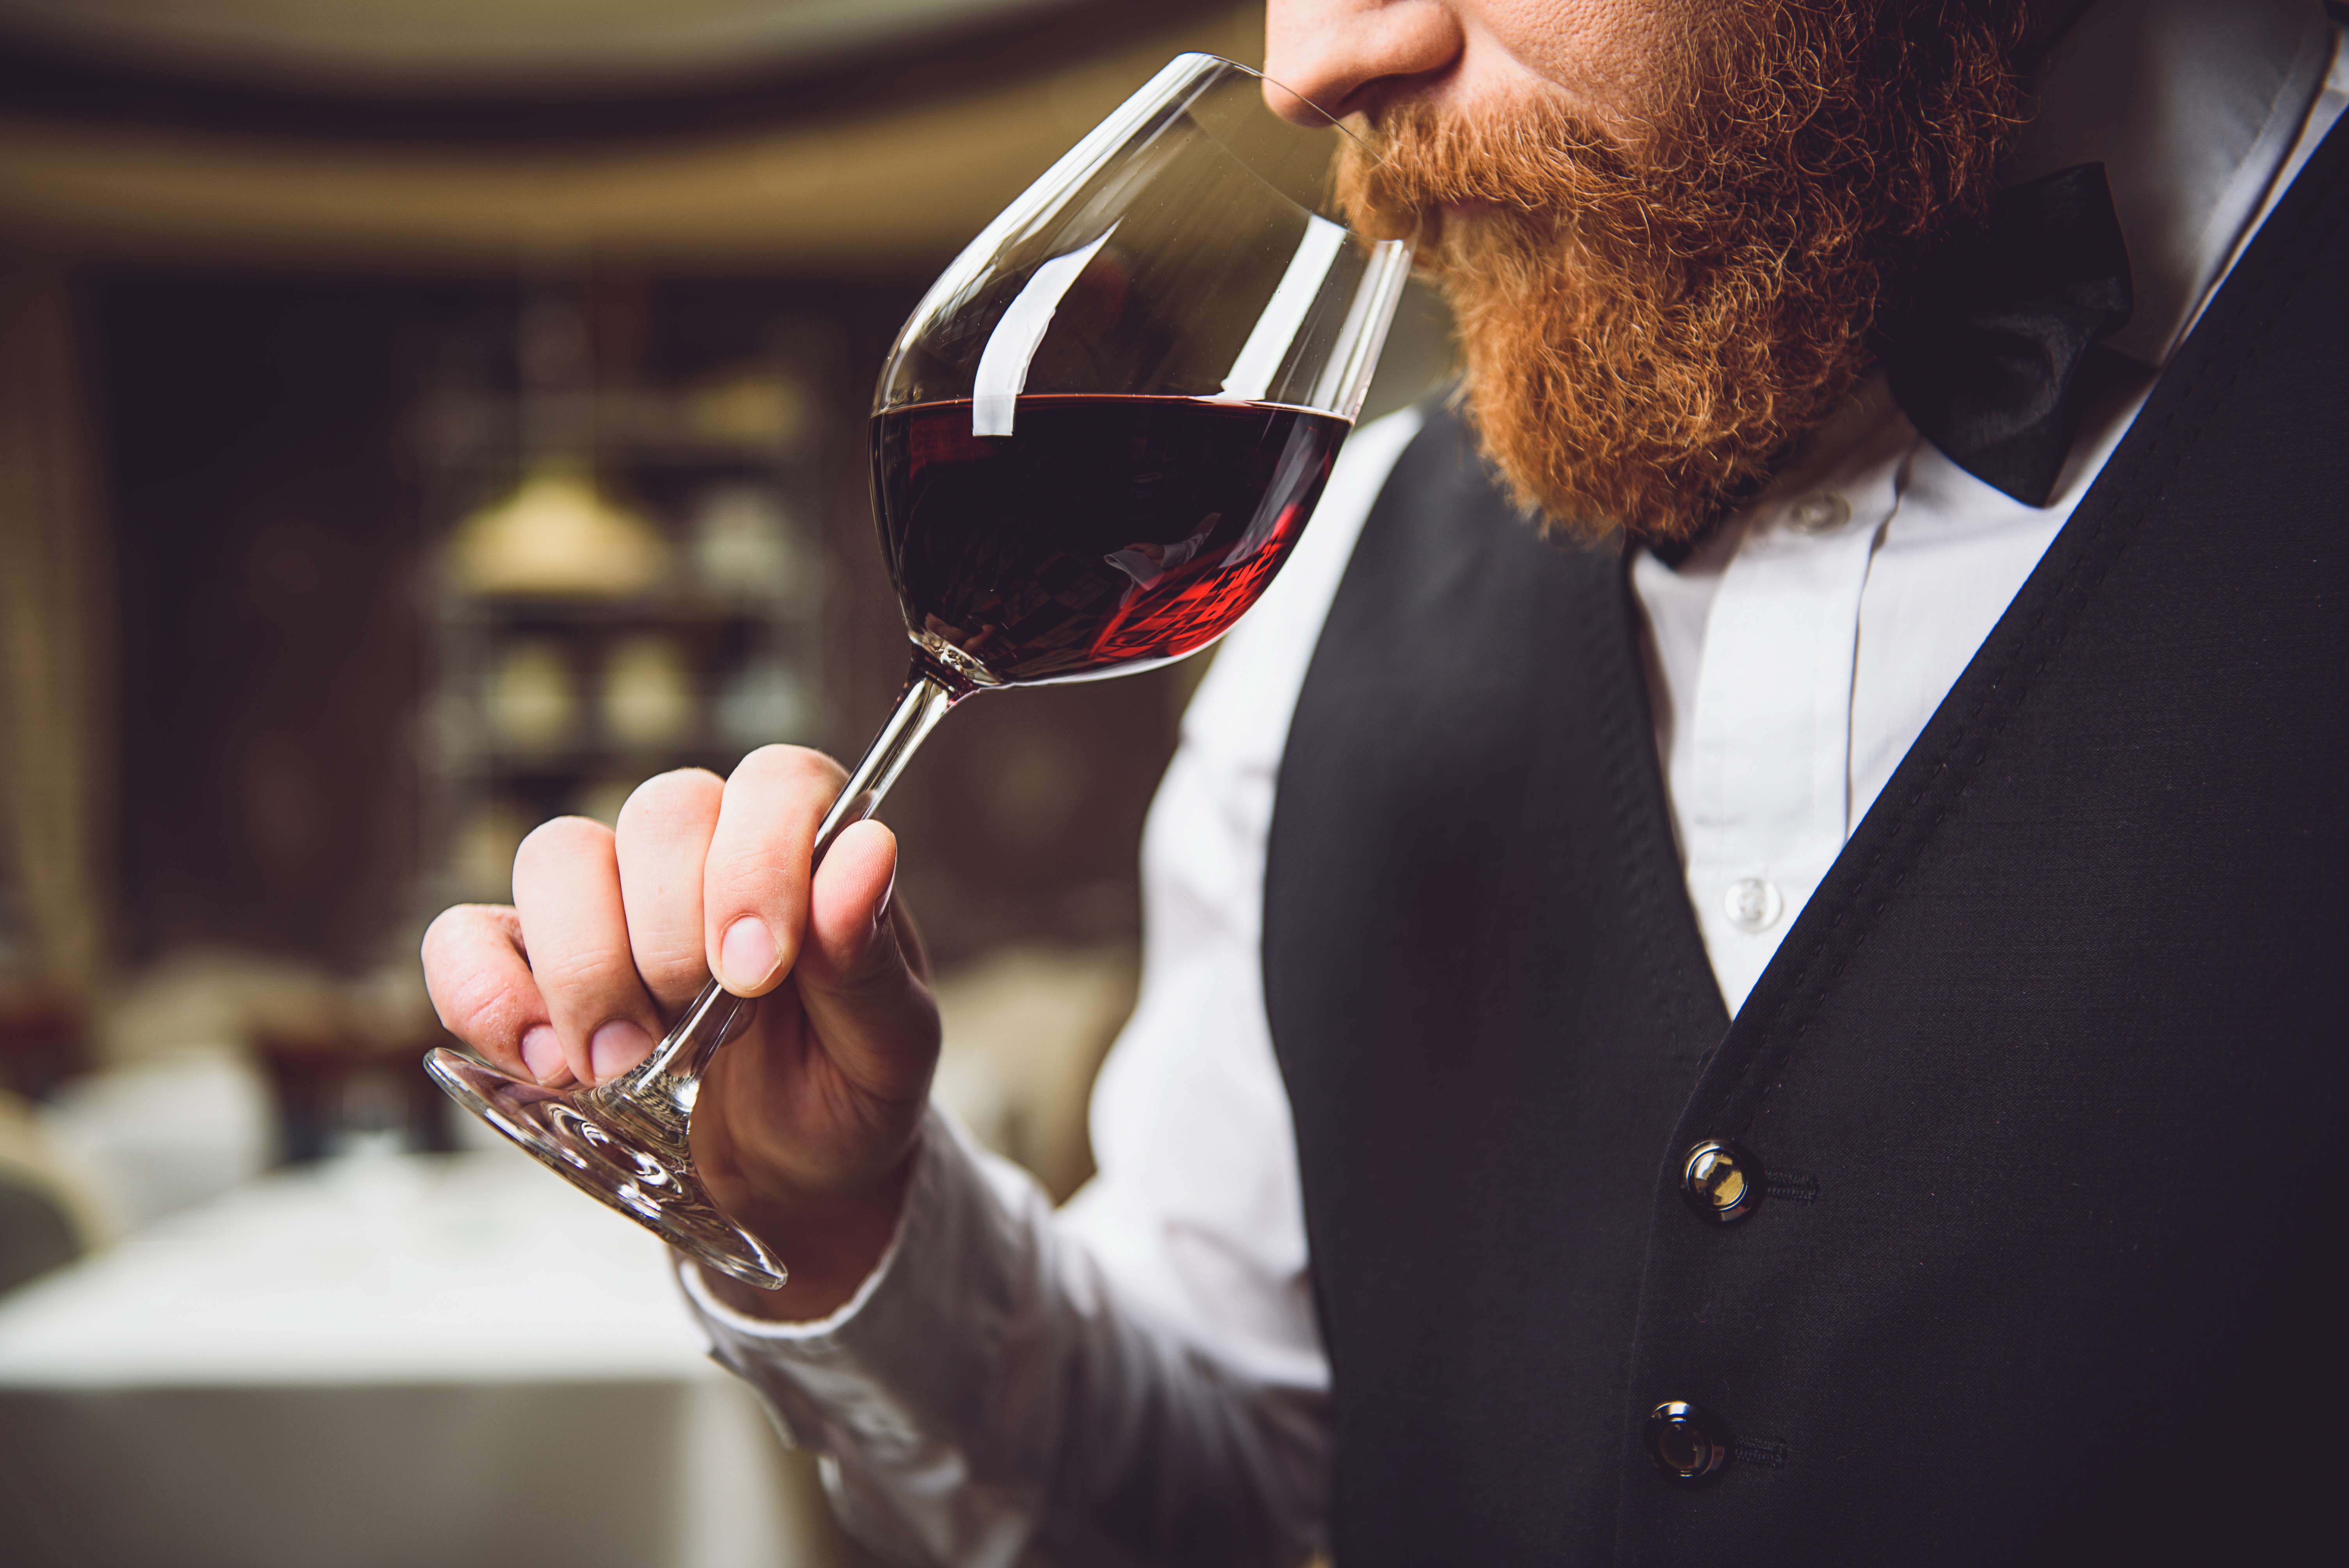 Wine appreciation continues to grow and develop in Hong Kong. Photo: Shutterstock